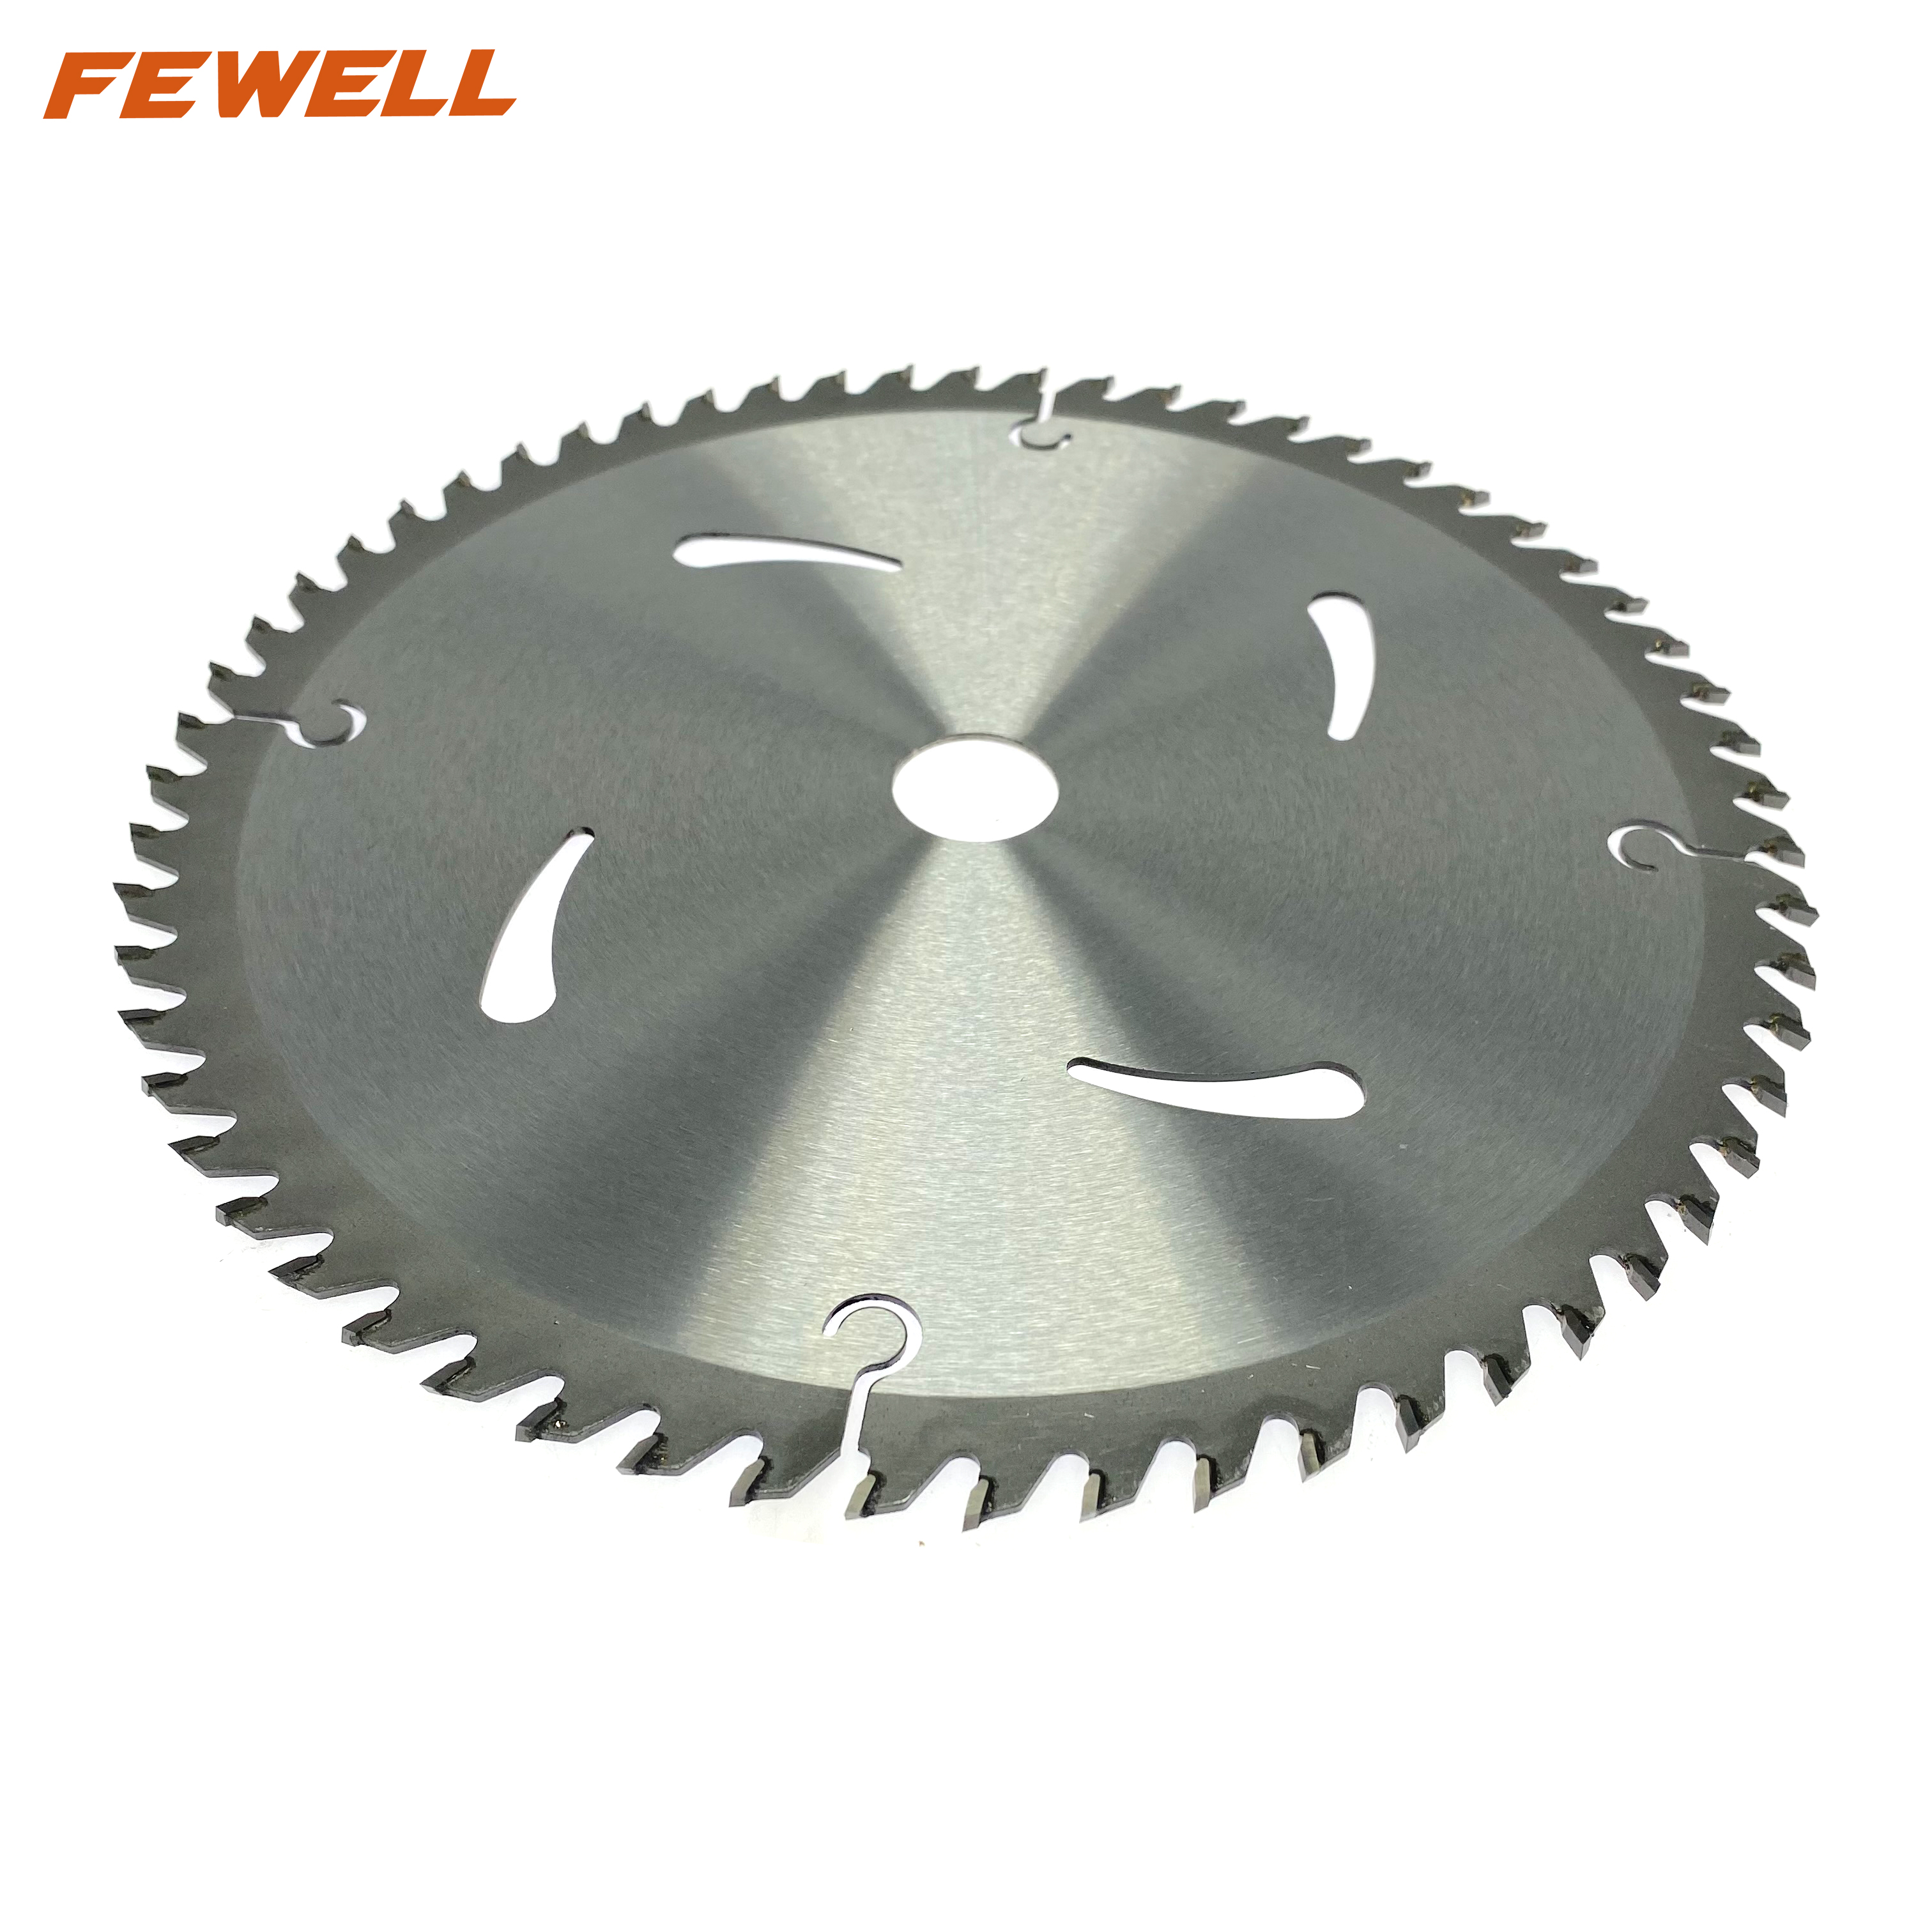 High quality 9inch 250*60T/80T/100T/120T tct circular saw blade for wood cutting